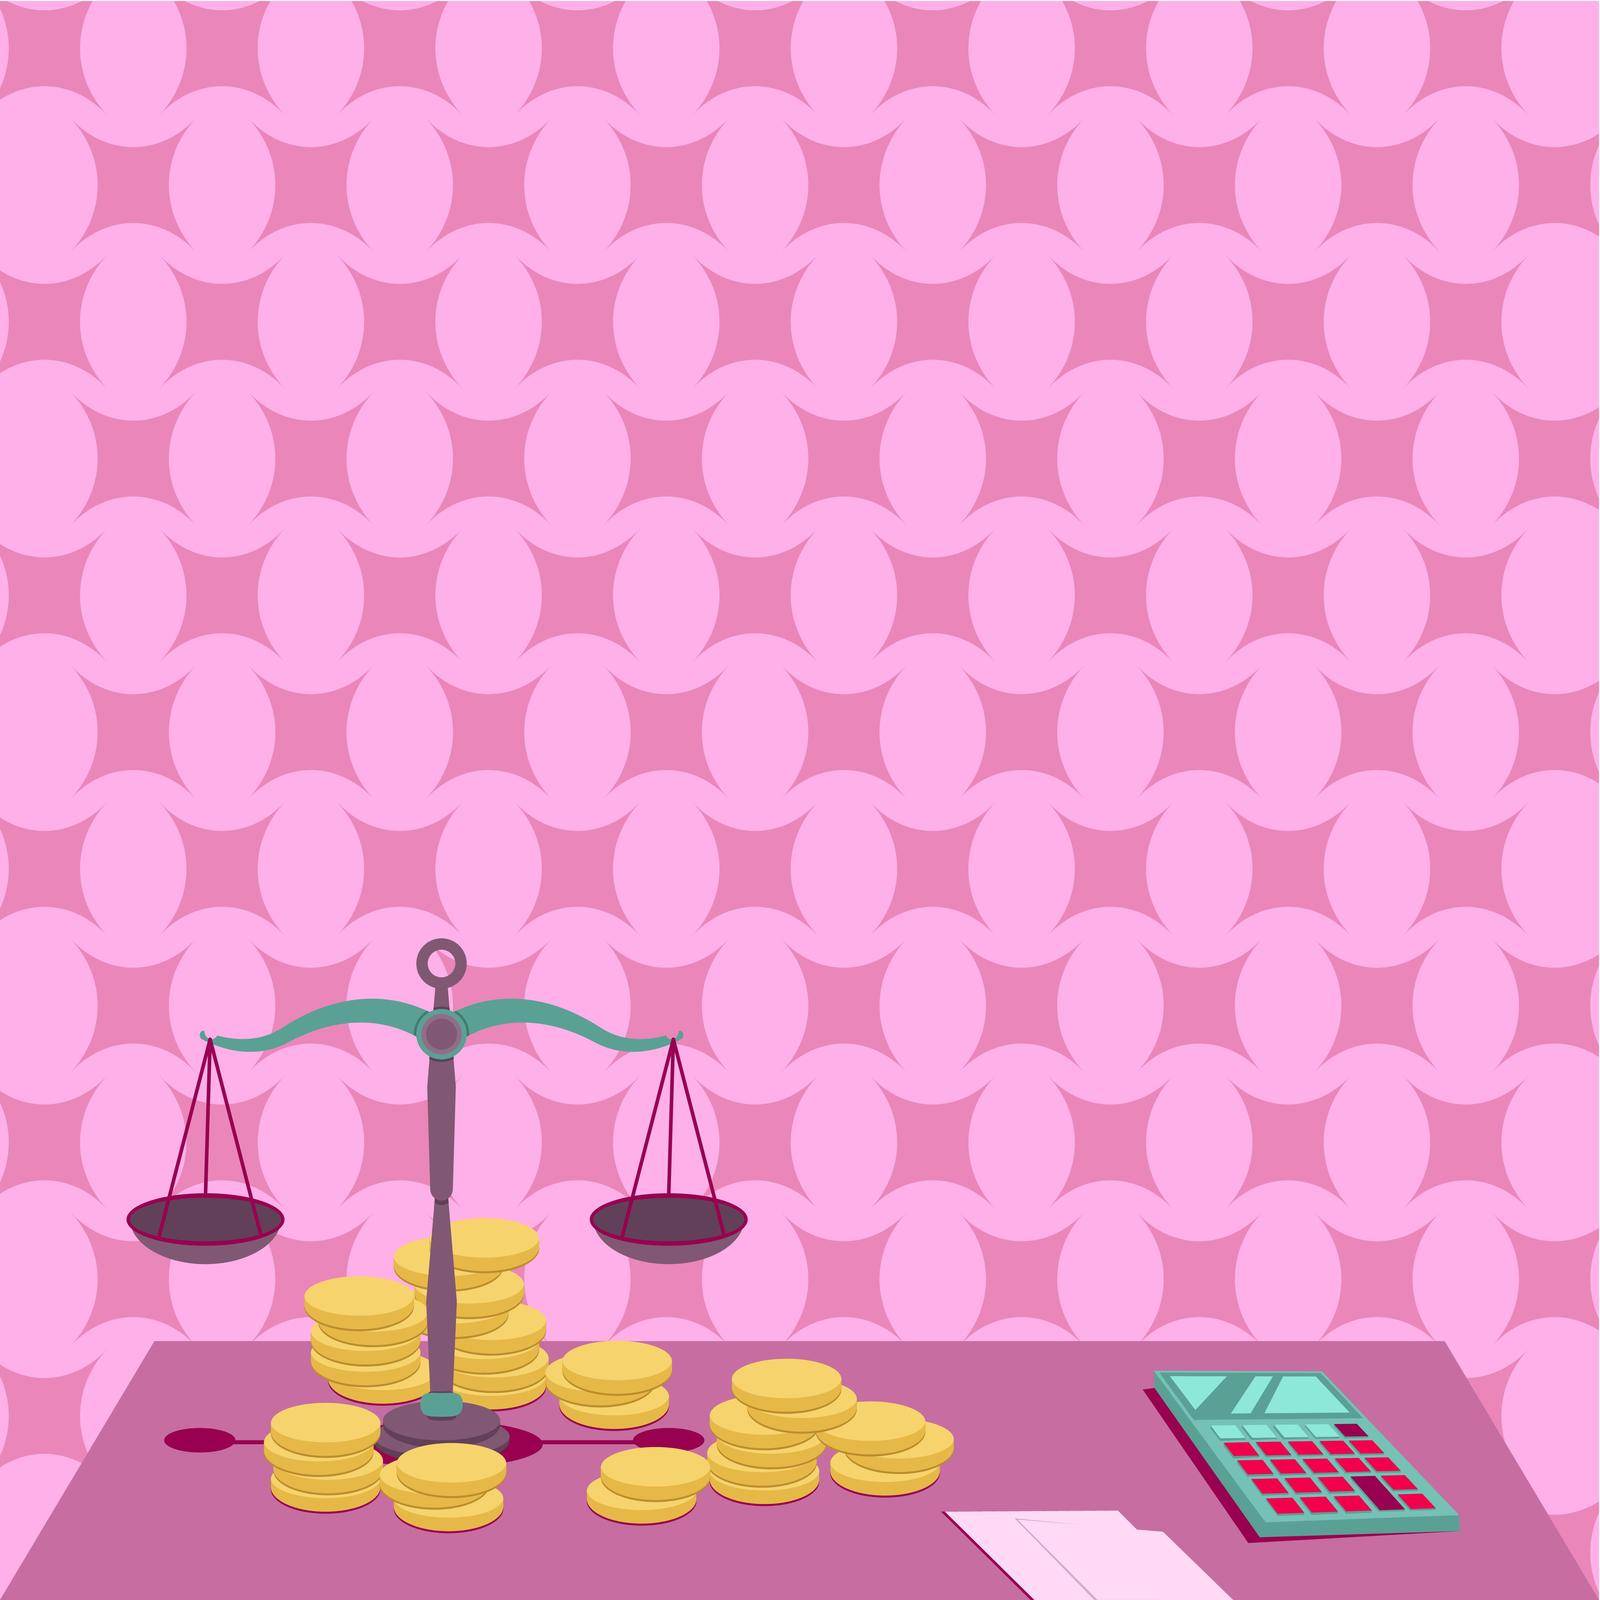 Balance Scale Surrounded By Coins Calculator Counting Financial Mortgages.